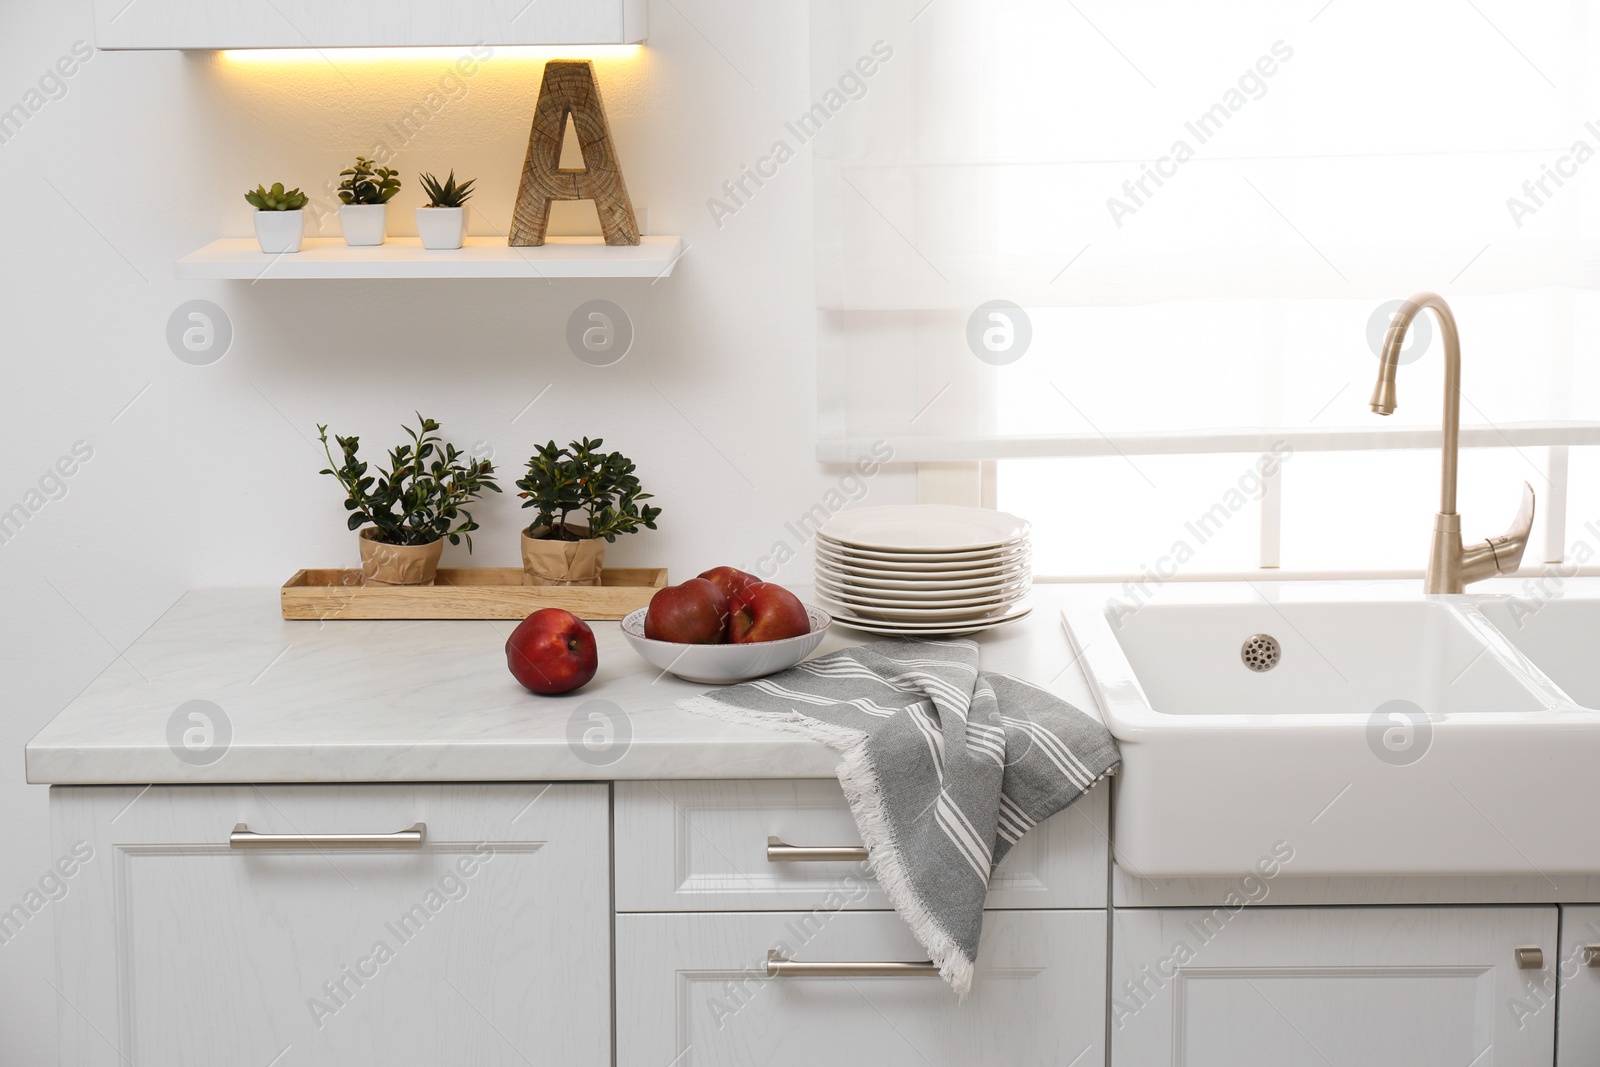 Photo of Modern kitchen interior with bowl full of ripe apples on counter